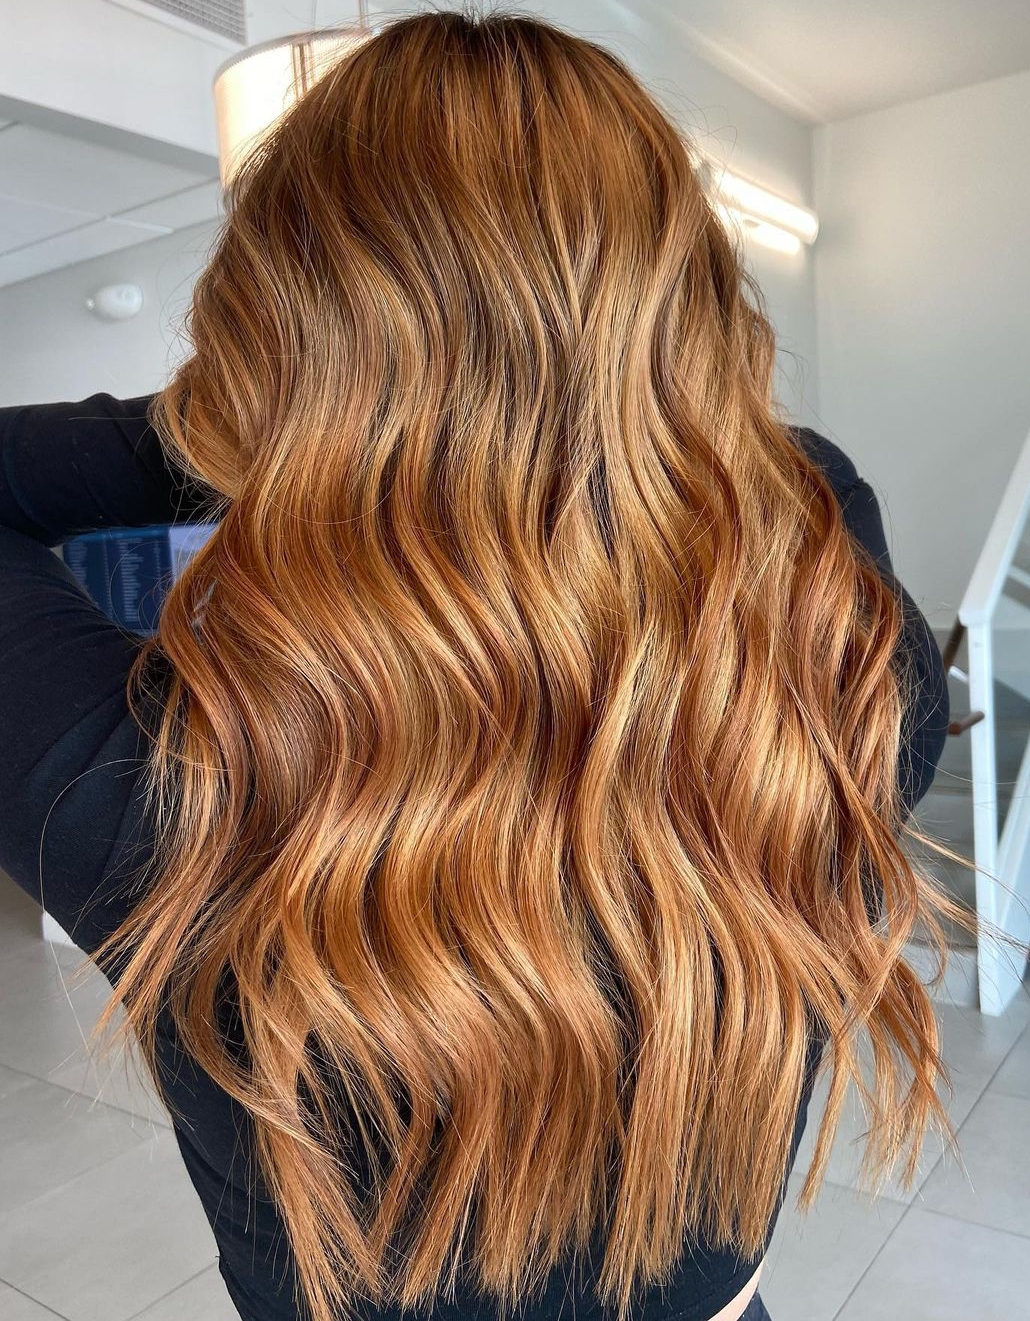 Copper Strawberry Blonde Balayage on Long Hair